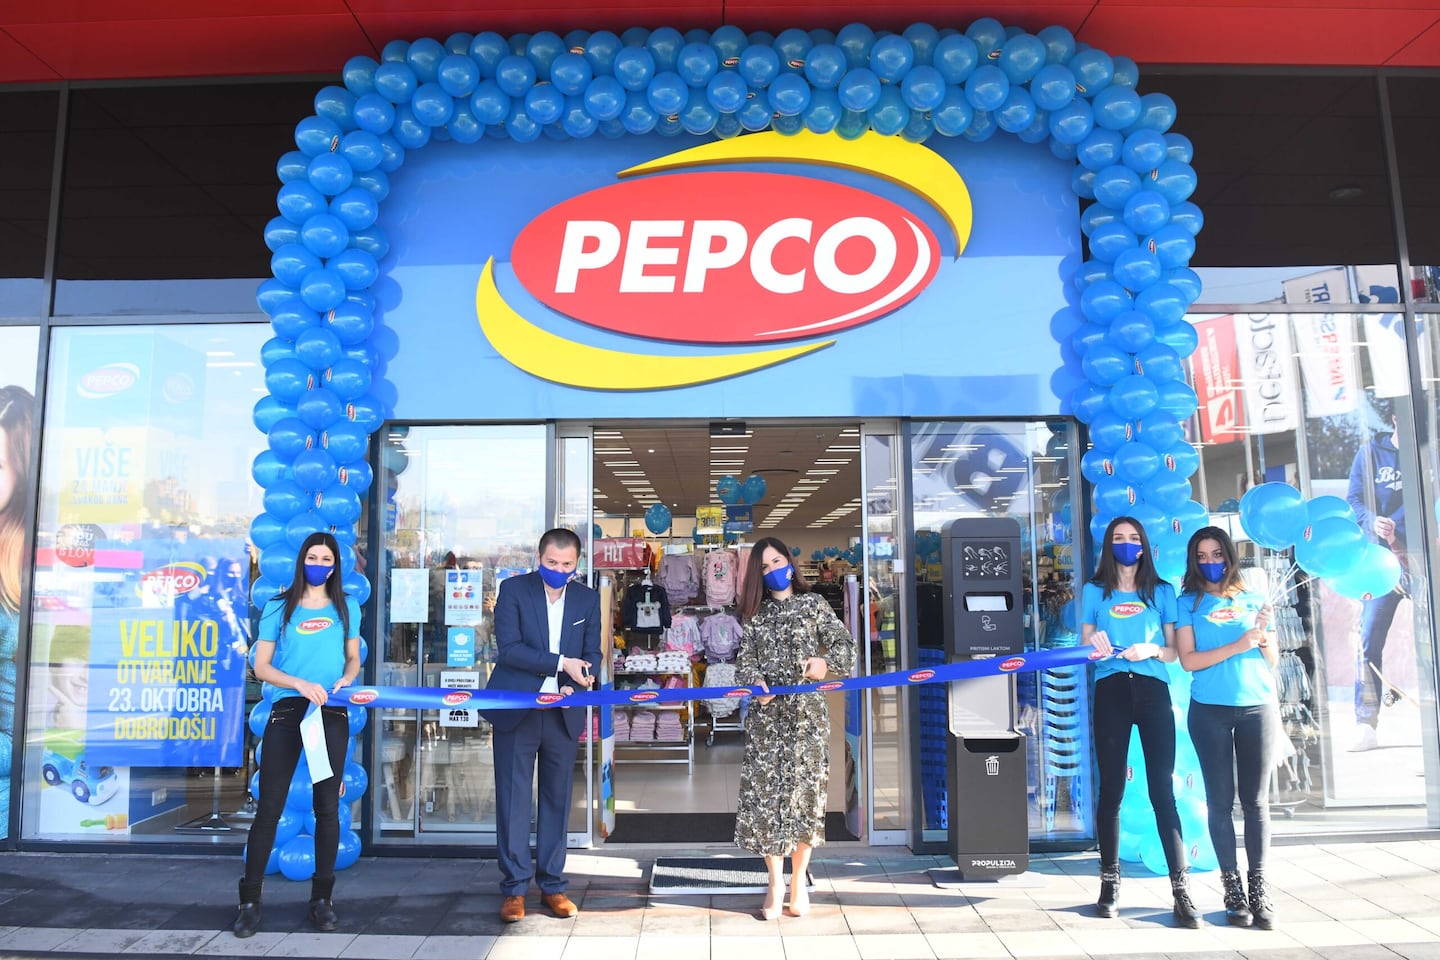 A new Pepco store in Serbia is pictured at its opening. Pepco.eu